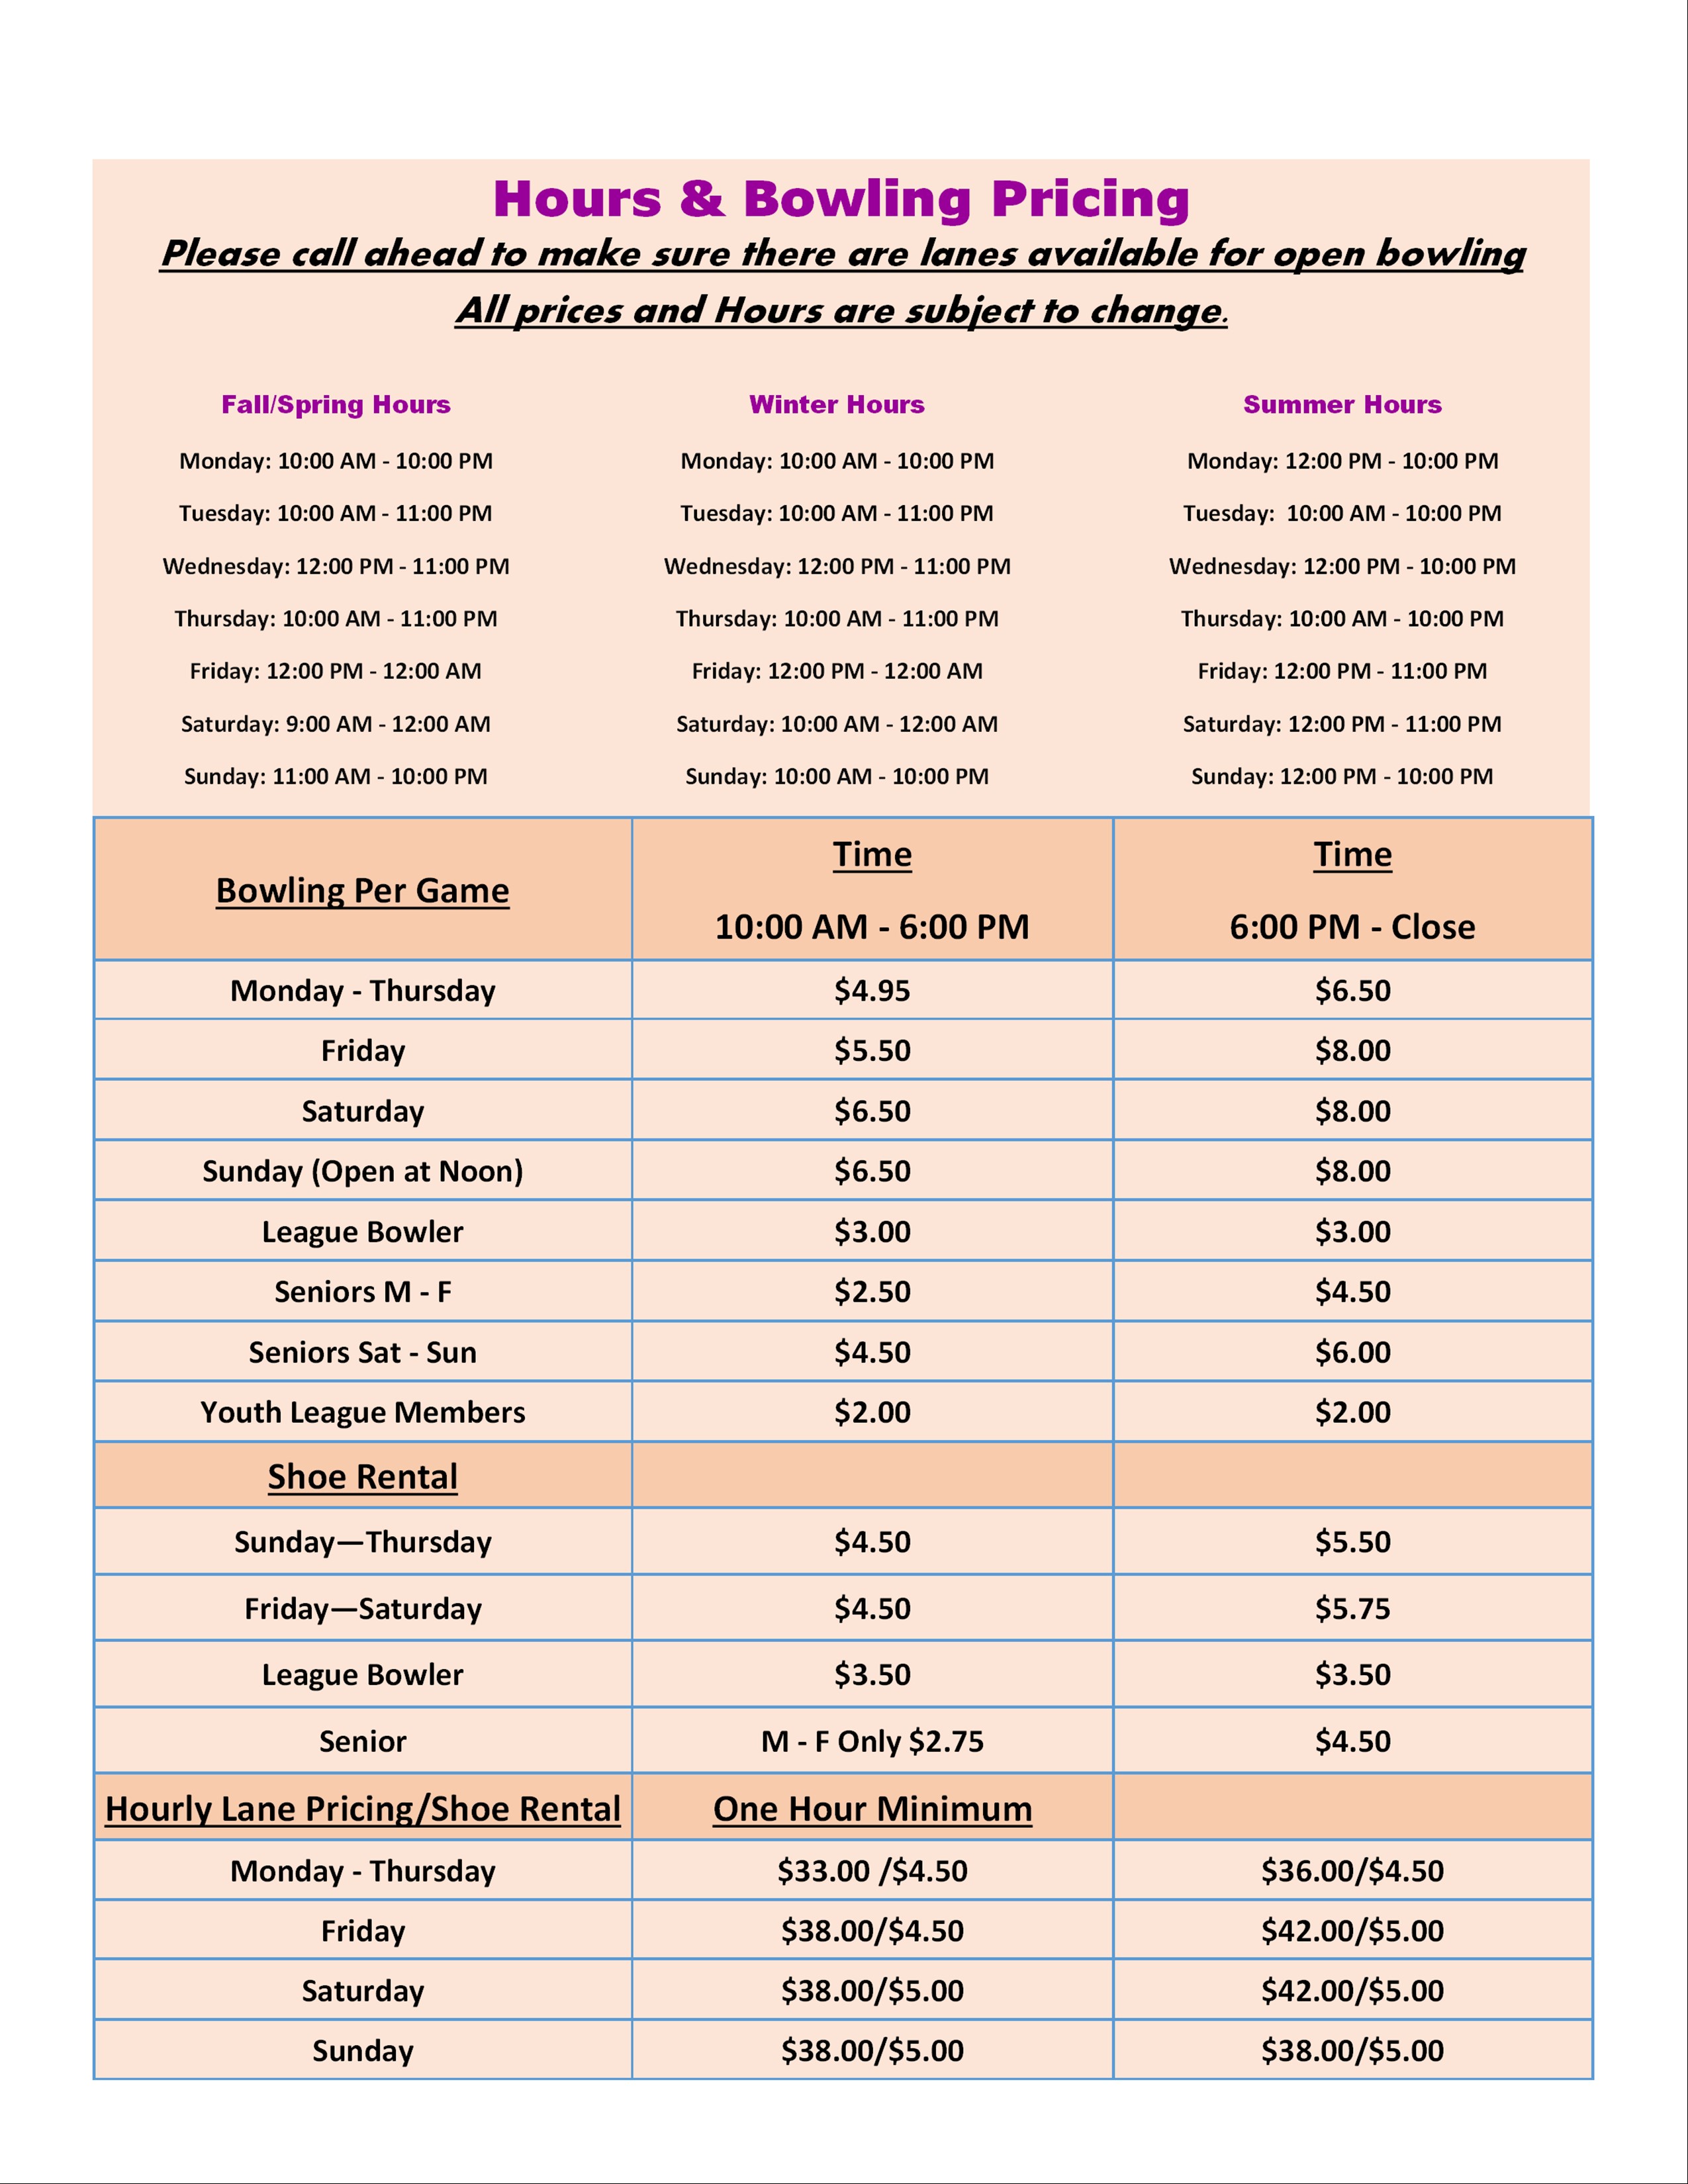 Lakeside Recreation Center Hours and Pricing